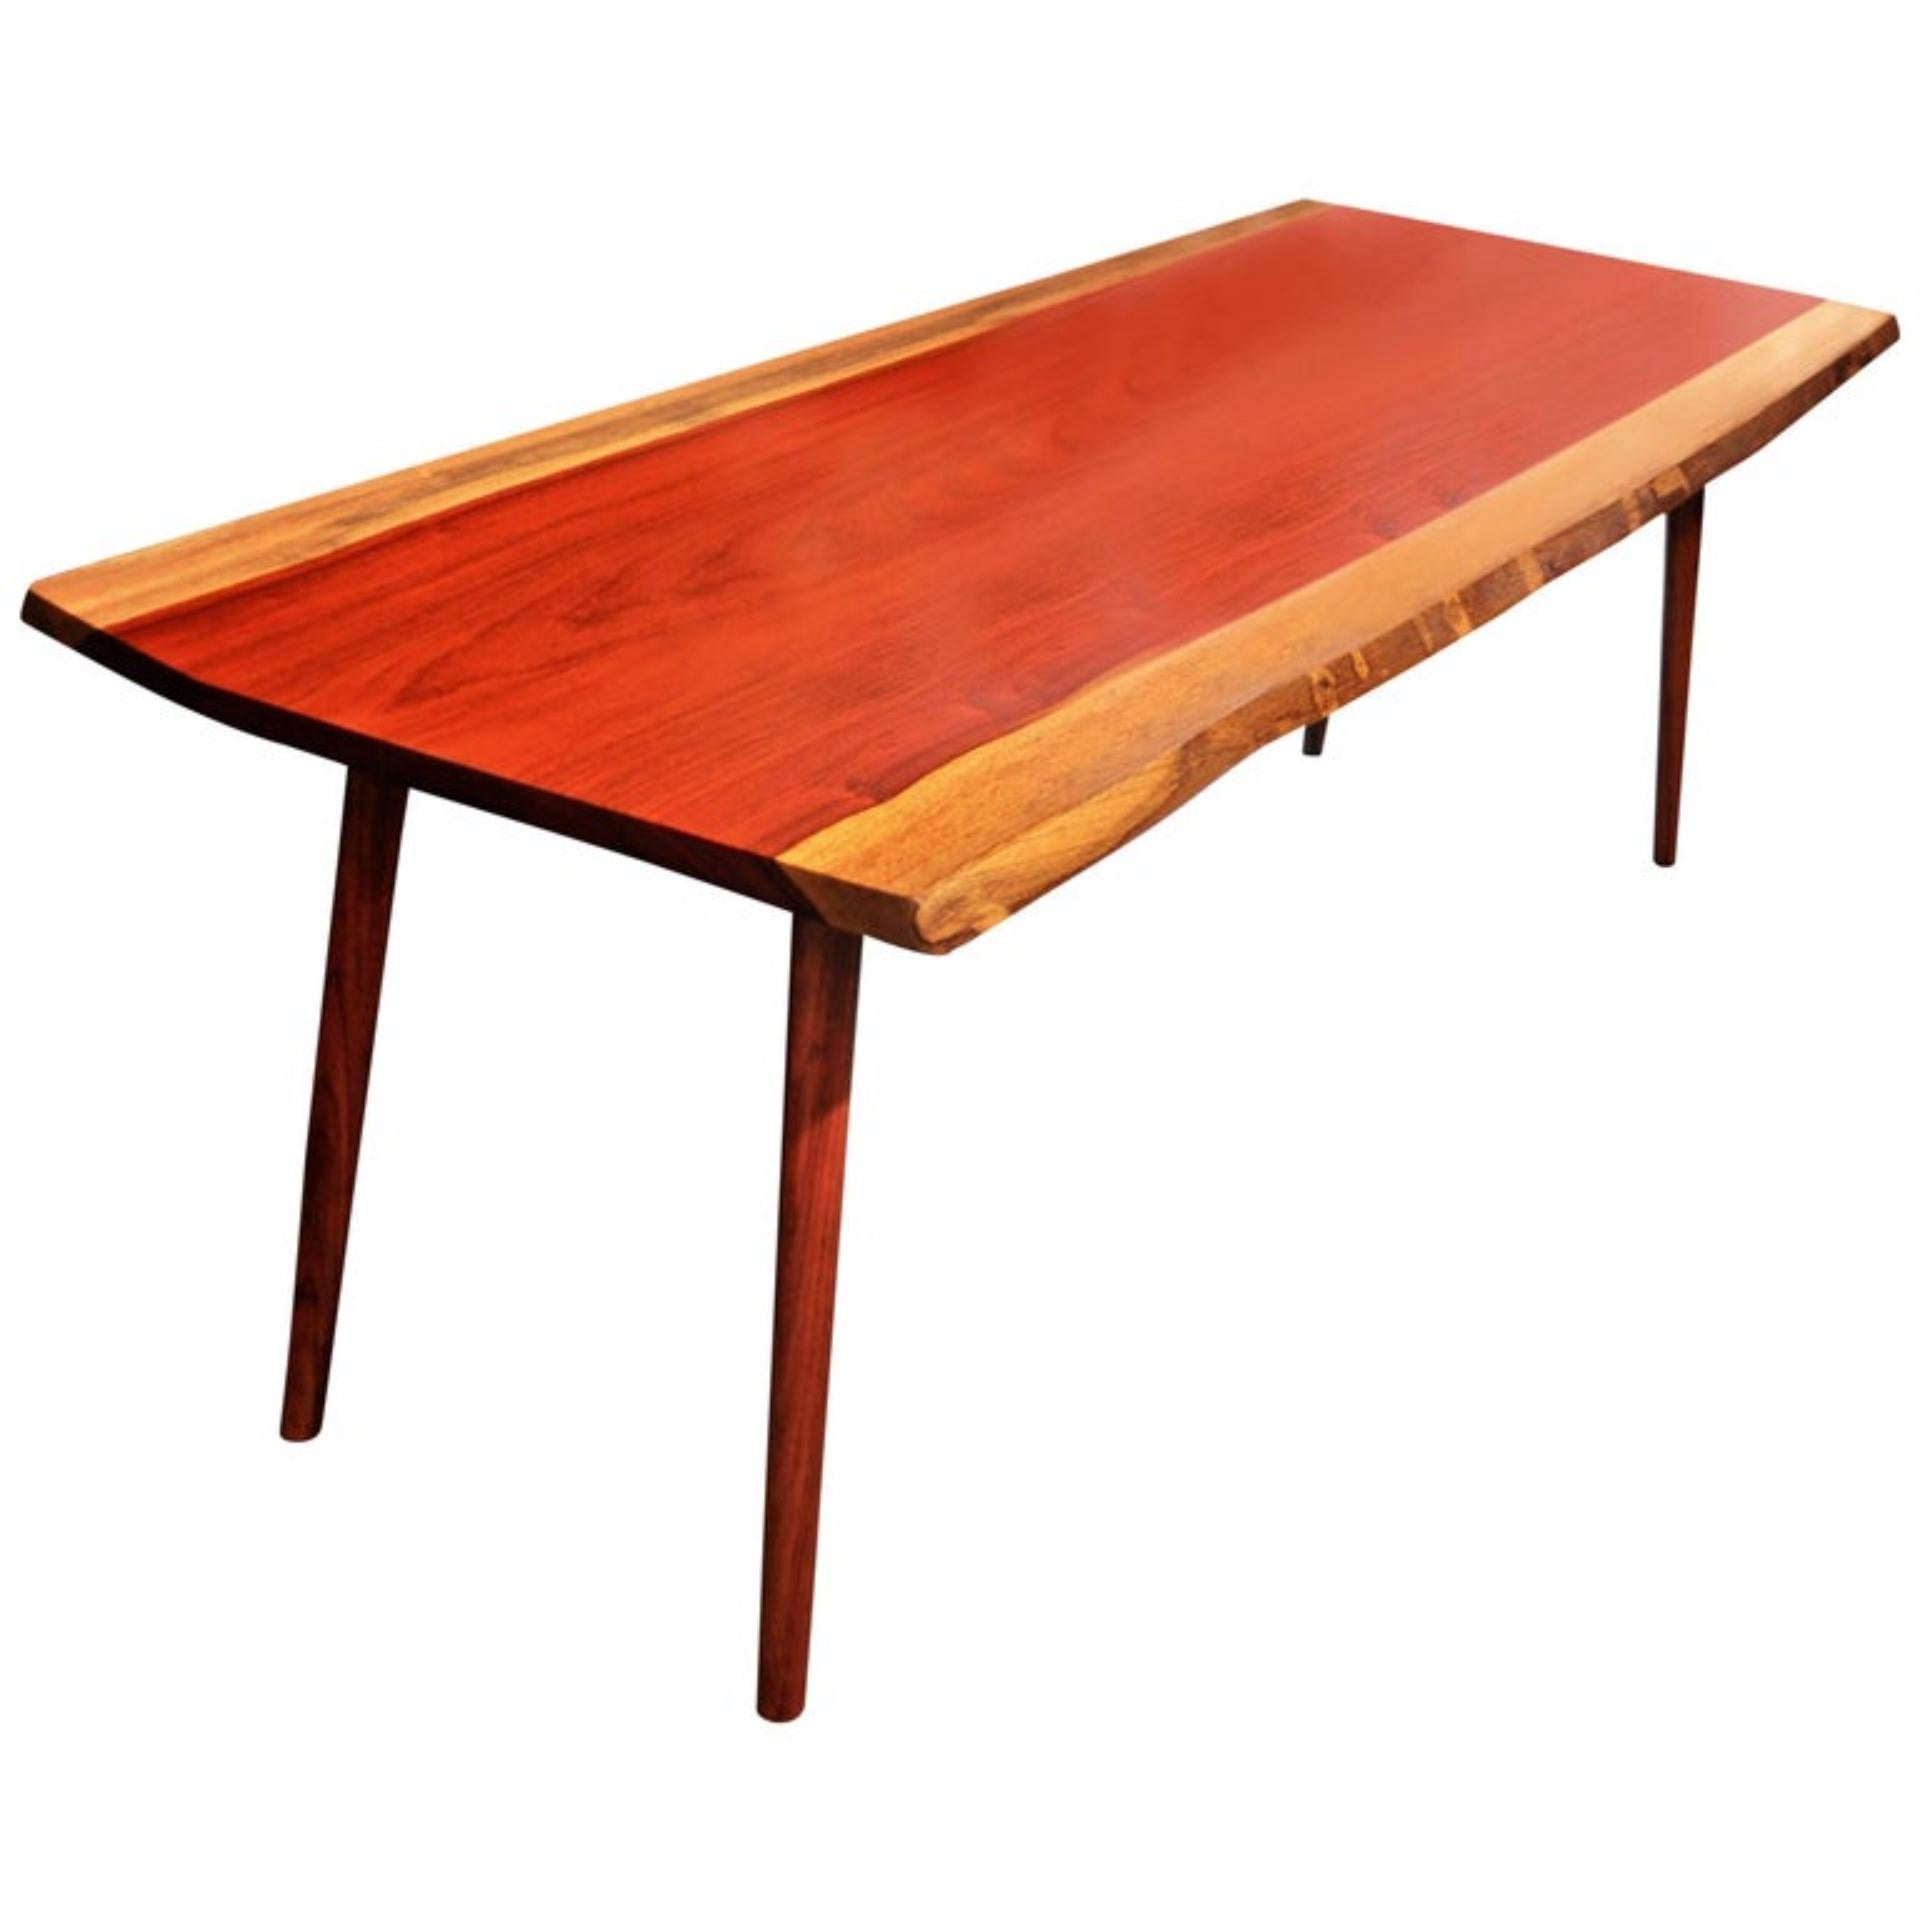 Unique signed table by Jörg Pietschmann
Dinner table, padouk, T1211
Measures: H 75 x W 210 x D 84 cm,
Rare big padouk plank, intense red colour with beautiful grain, which darkens to burgundy red.
Two mirrored planks give the 3.5 cm thick table